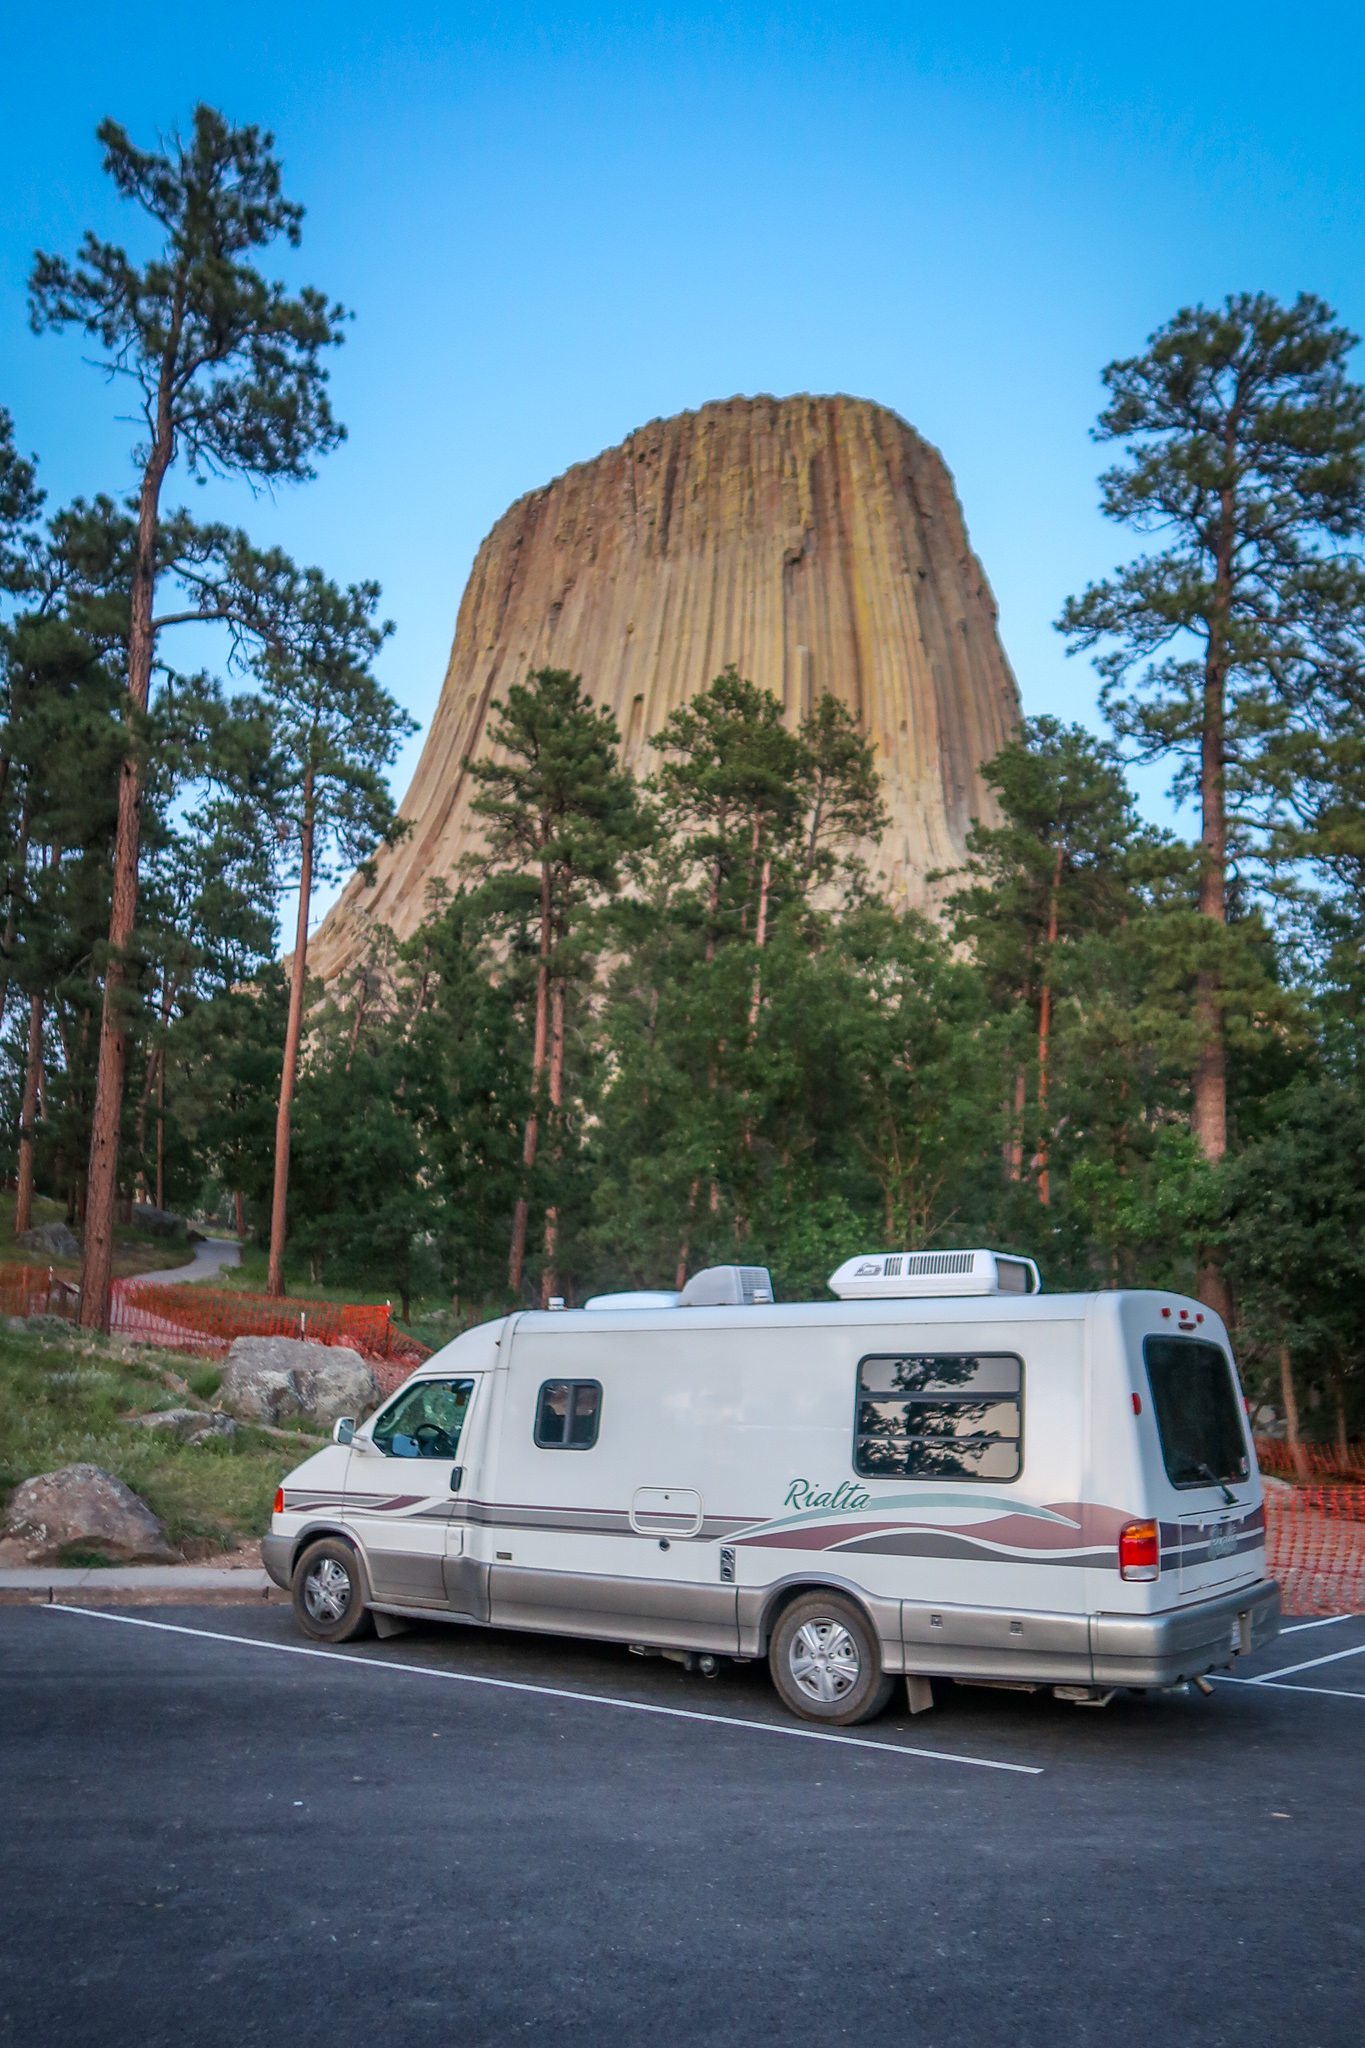 Great America Road Trip Day 26: Bear’s Lodge (Devil’s Tower)